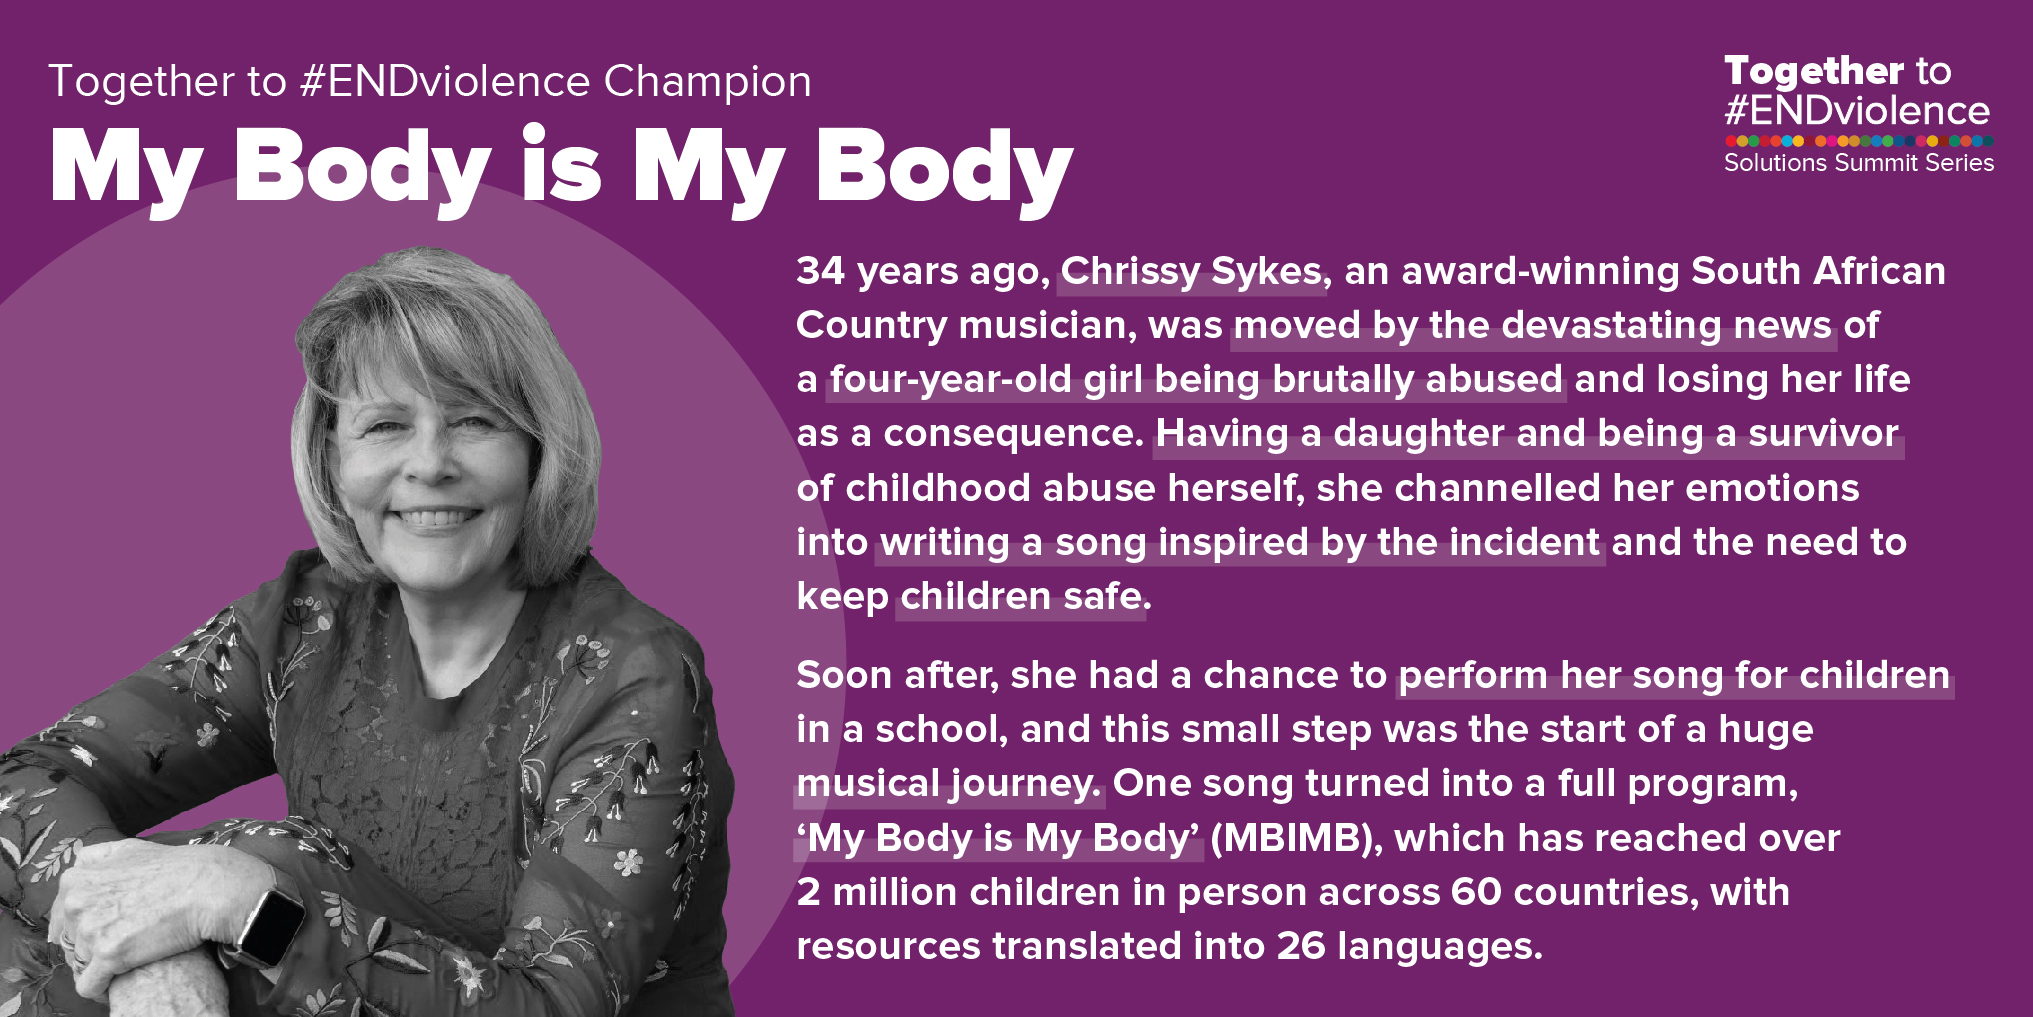 ‘My body is my body’ - a musical message to empower children against abuse